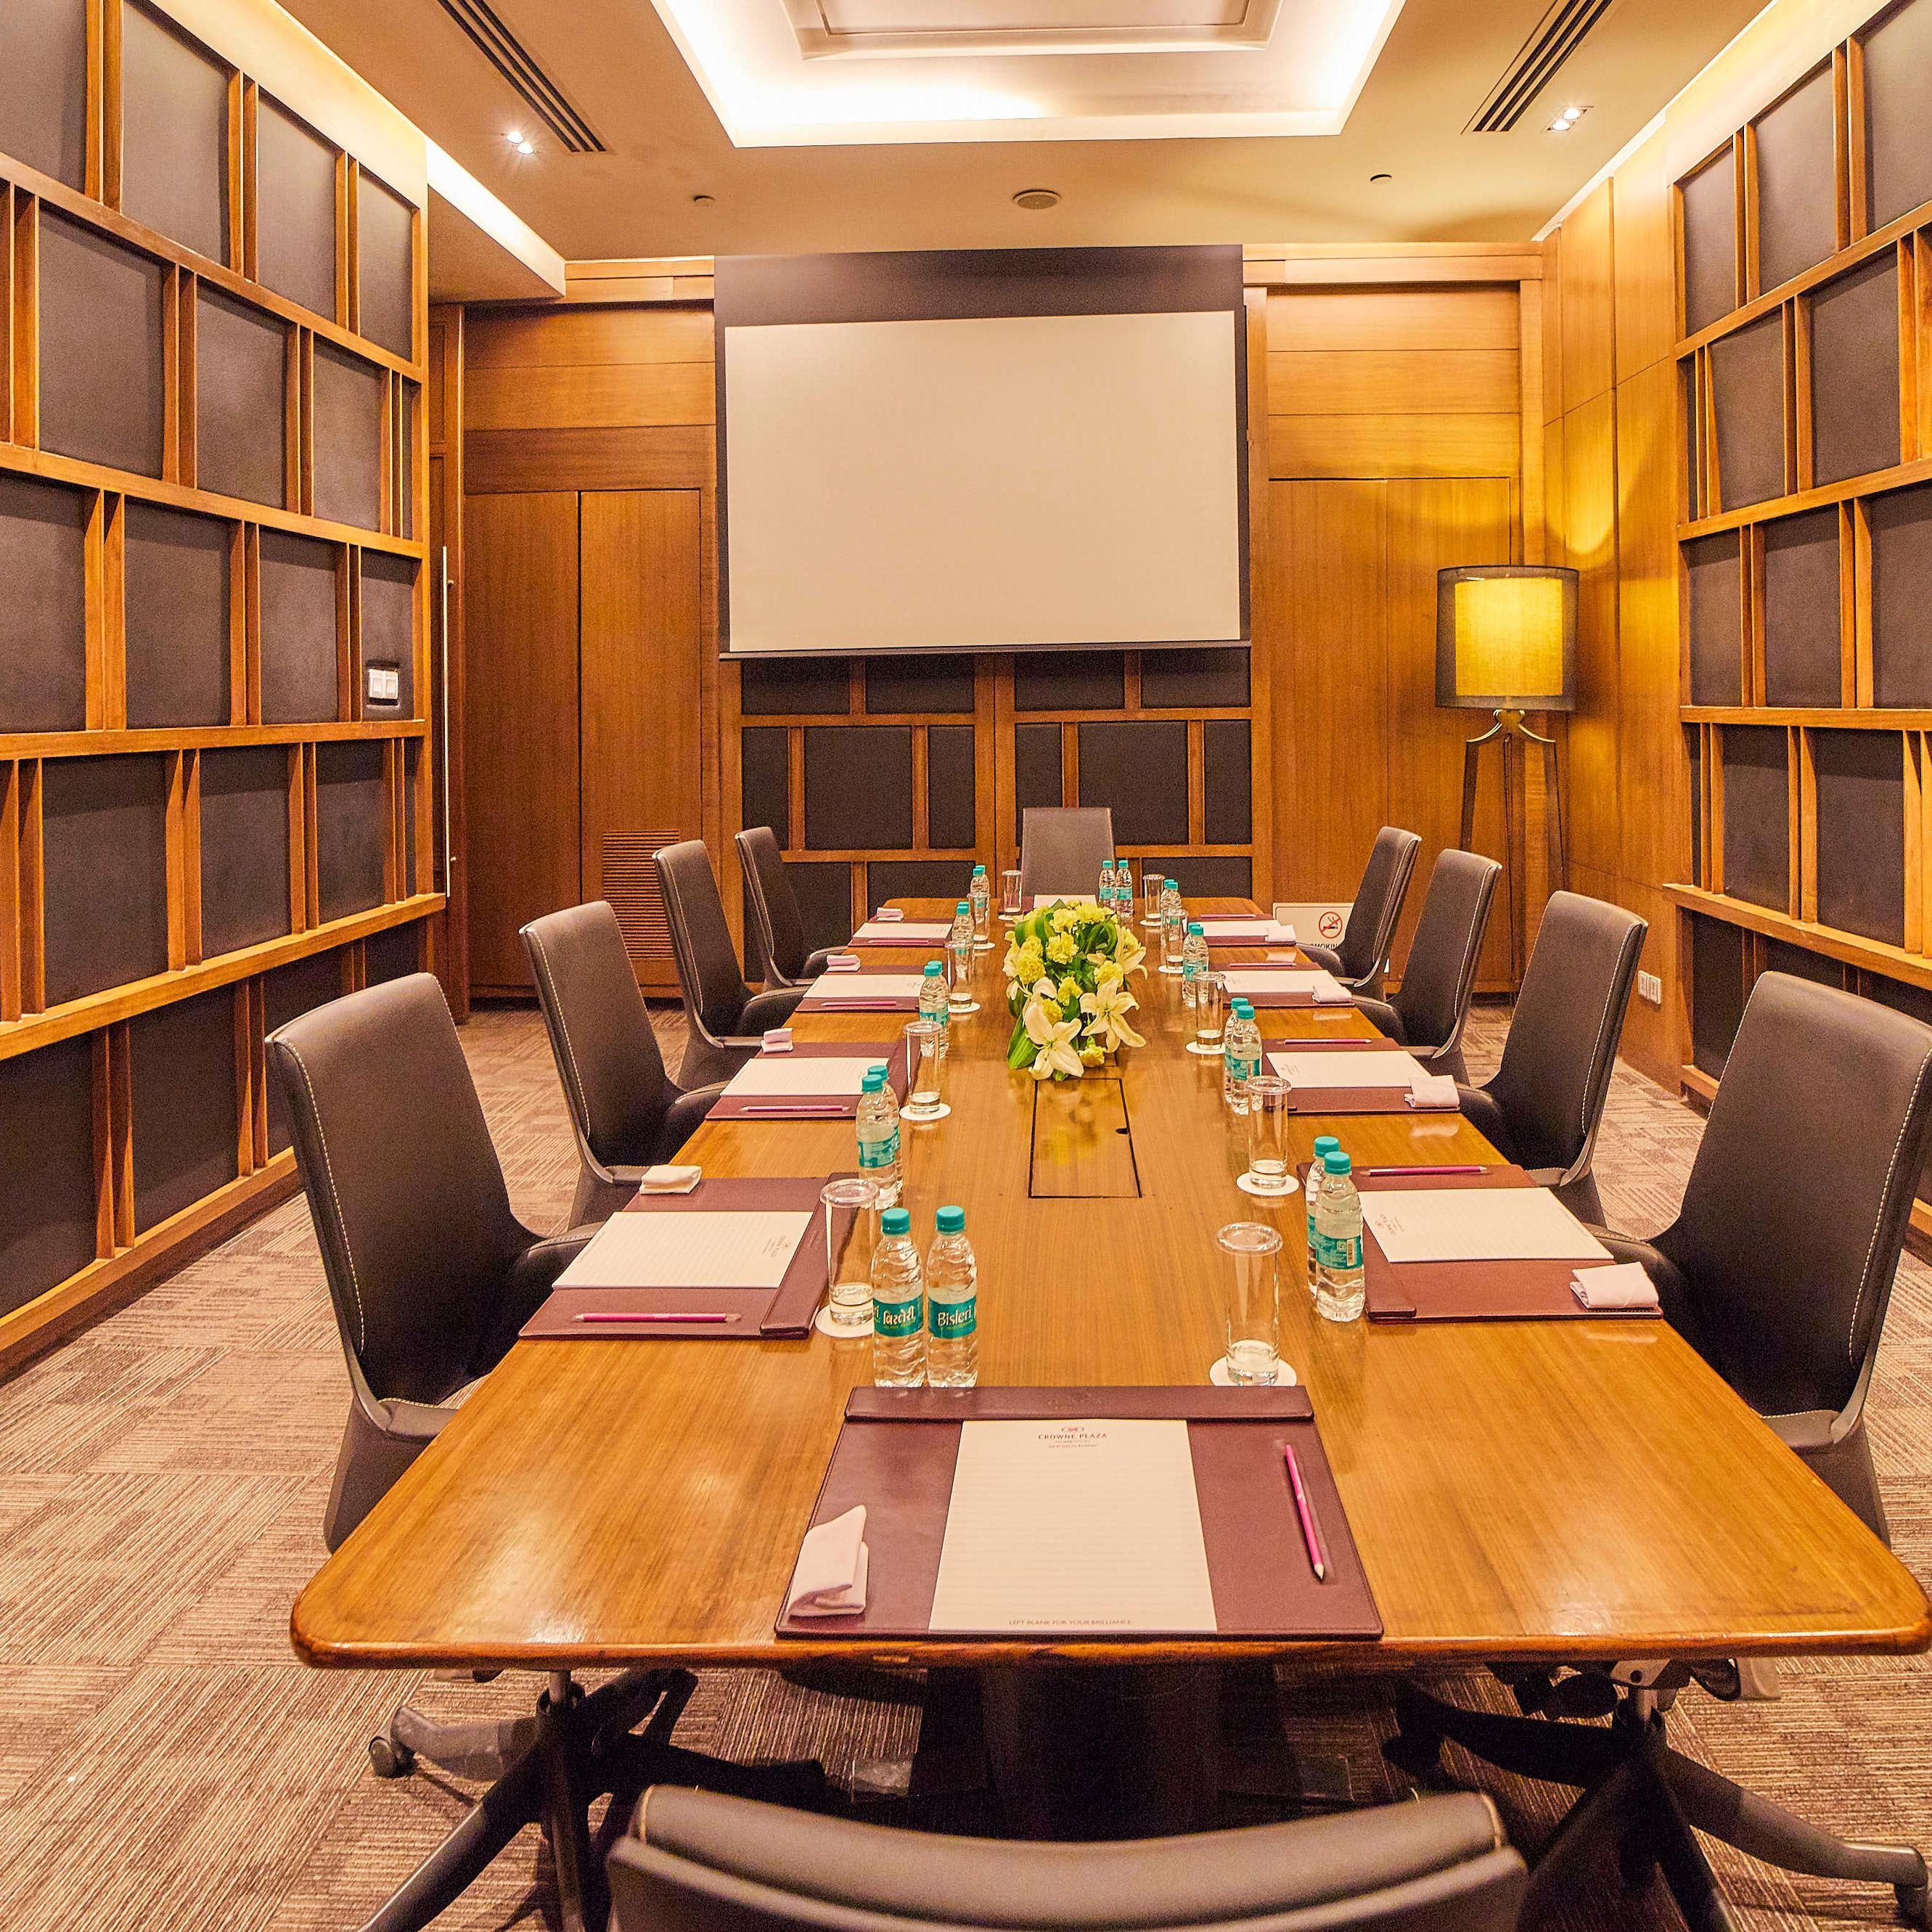 Our Meeting Rooms offers the best of technological facilities